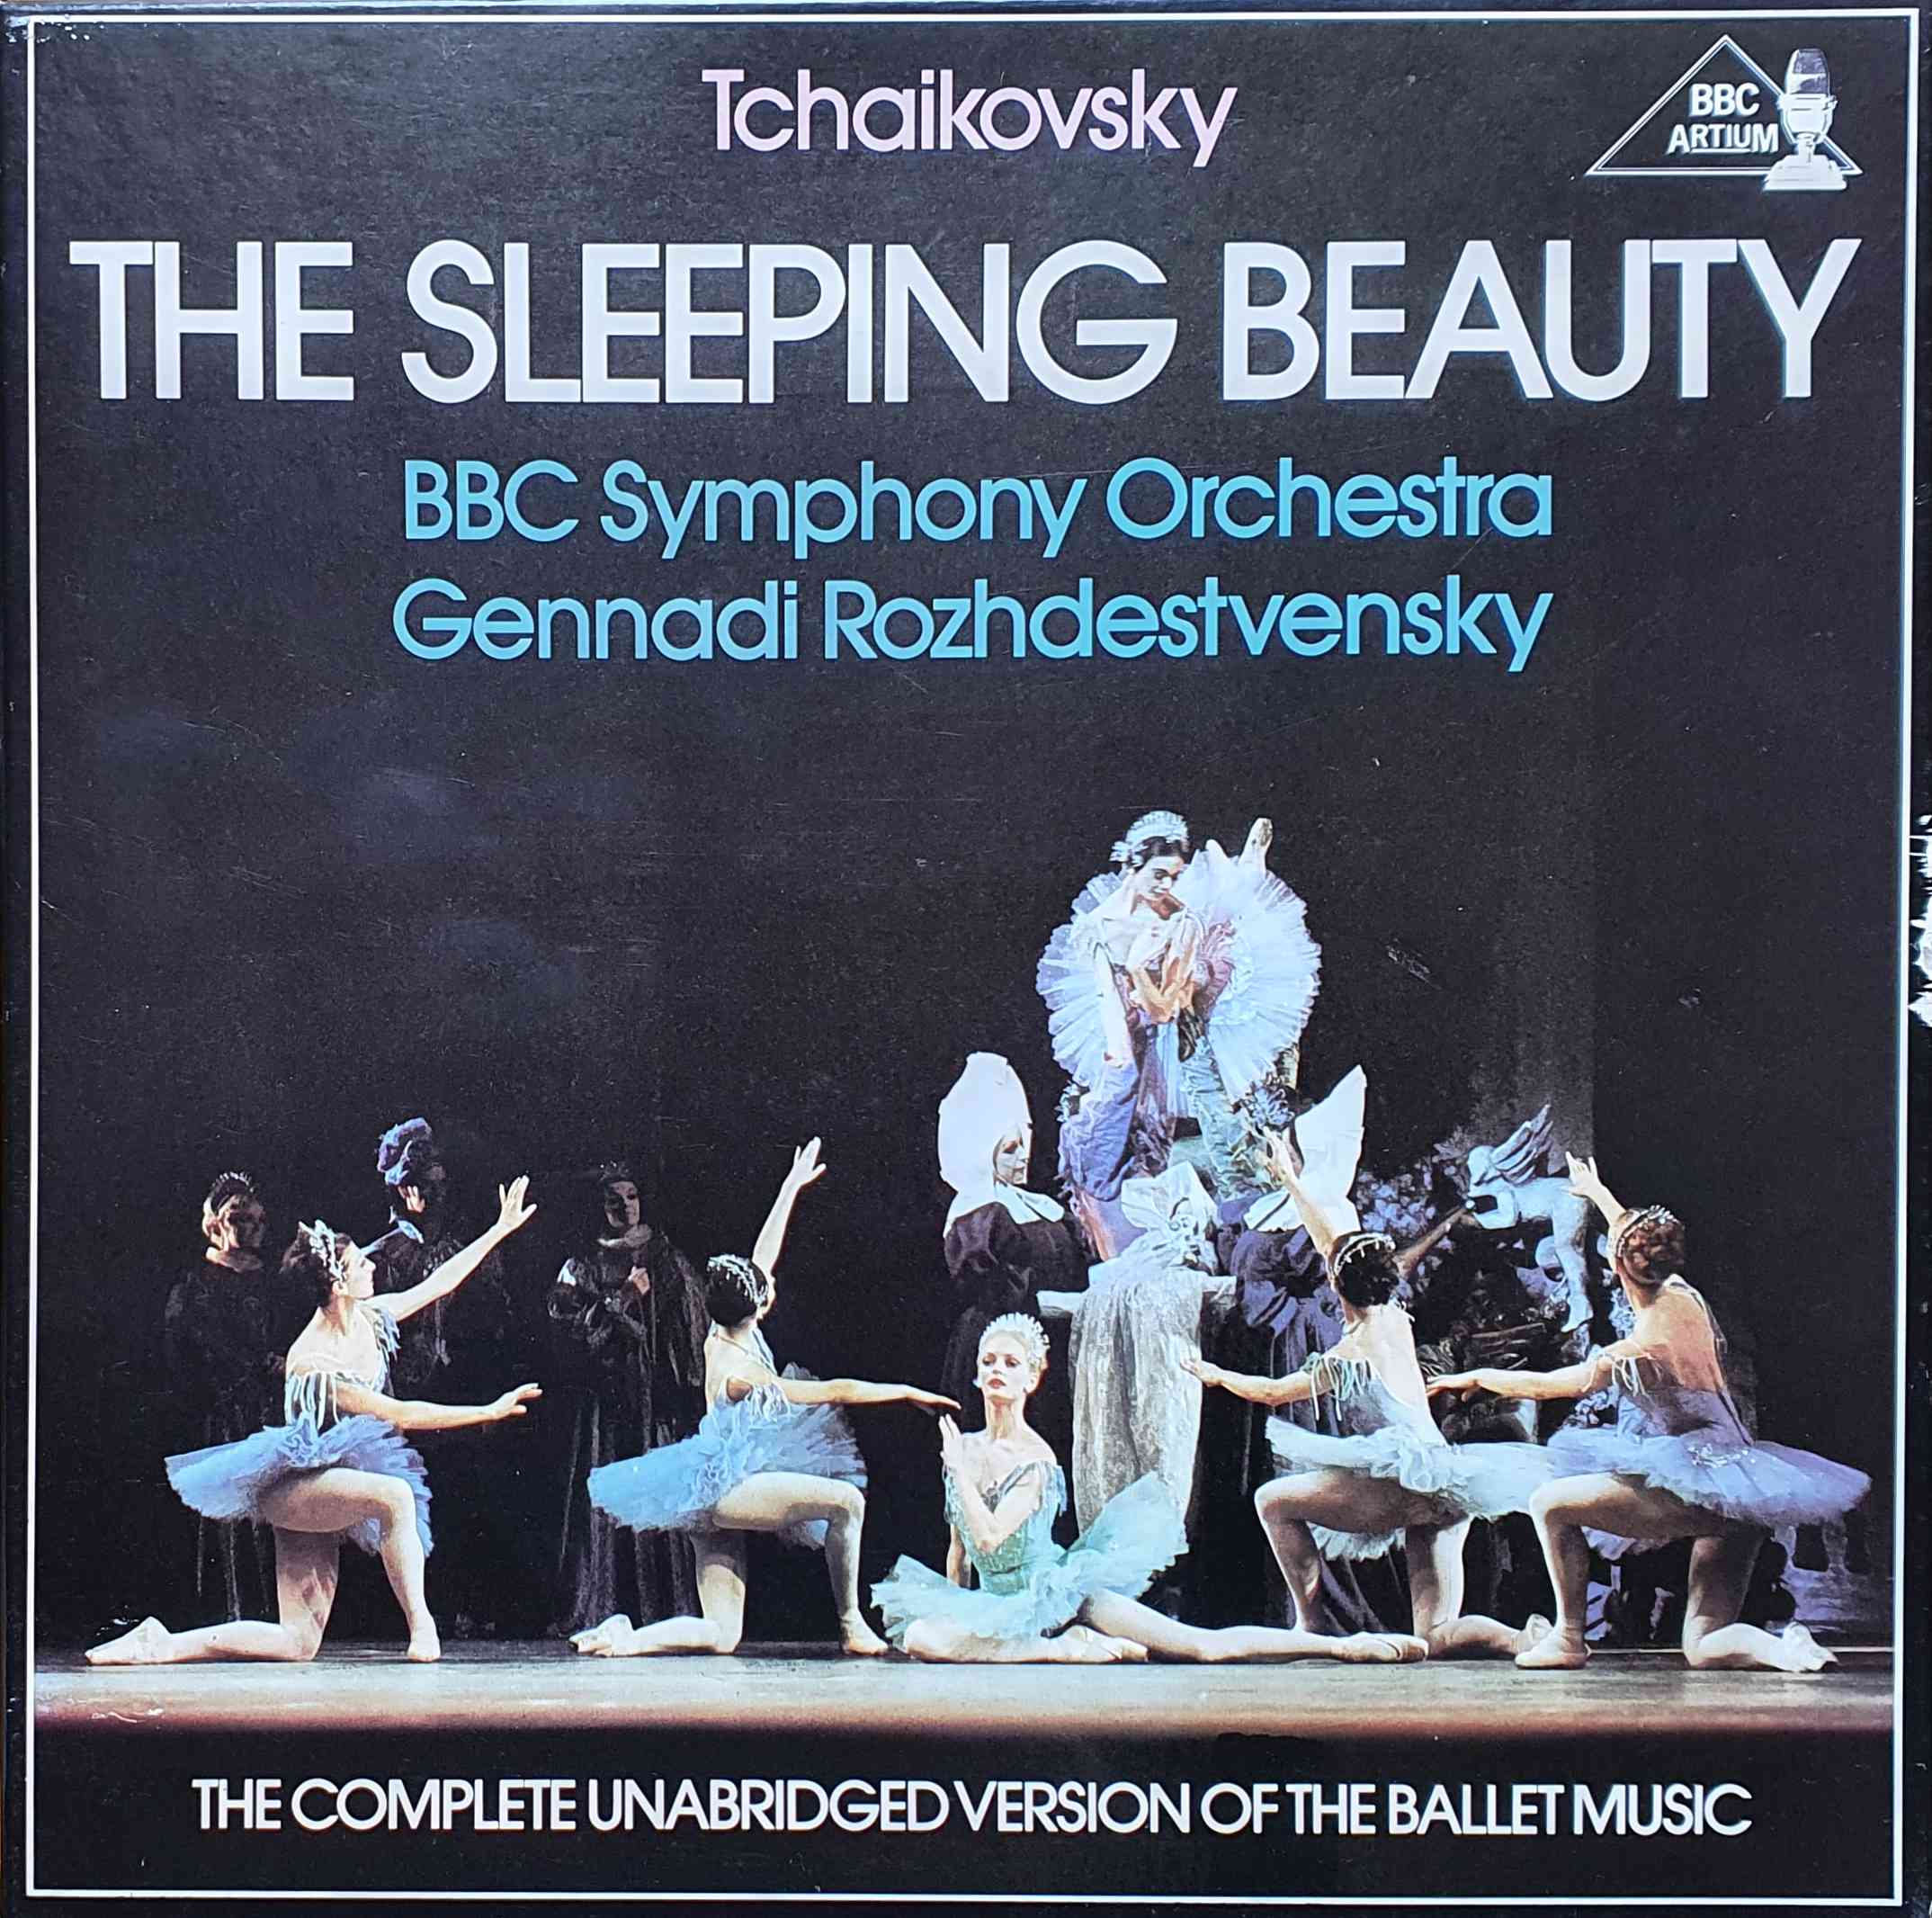 Picture of The sleeping beauty by artist Tchaikovsky from the BBC albums - Records and Tapes library